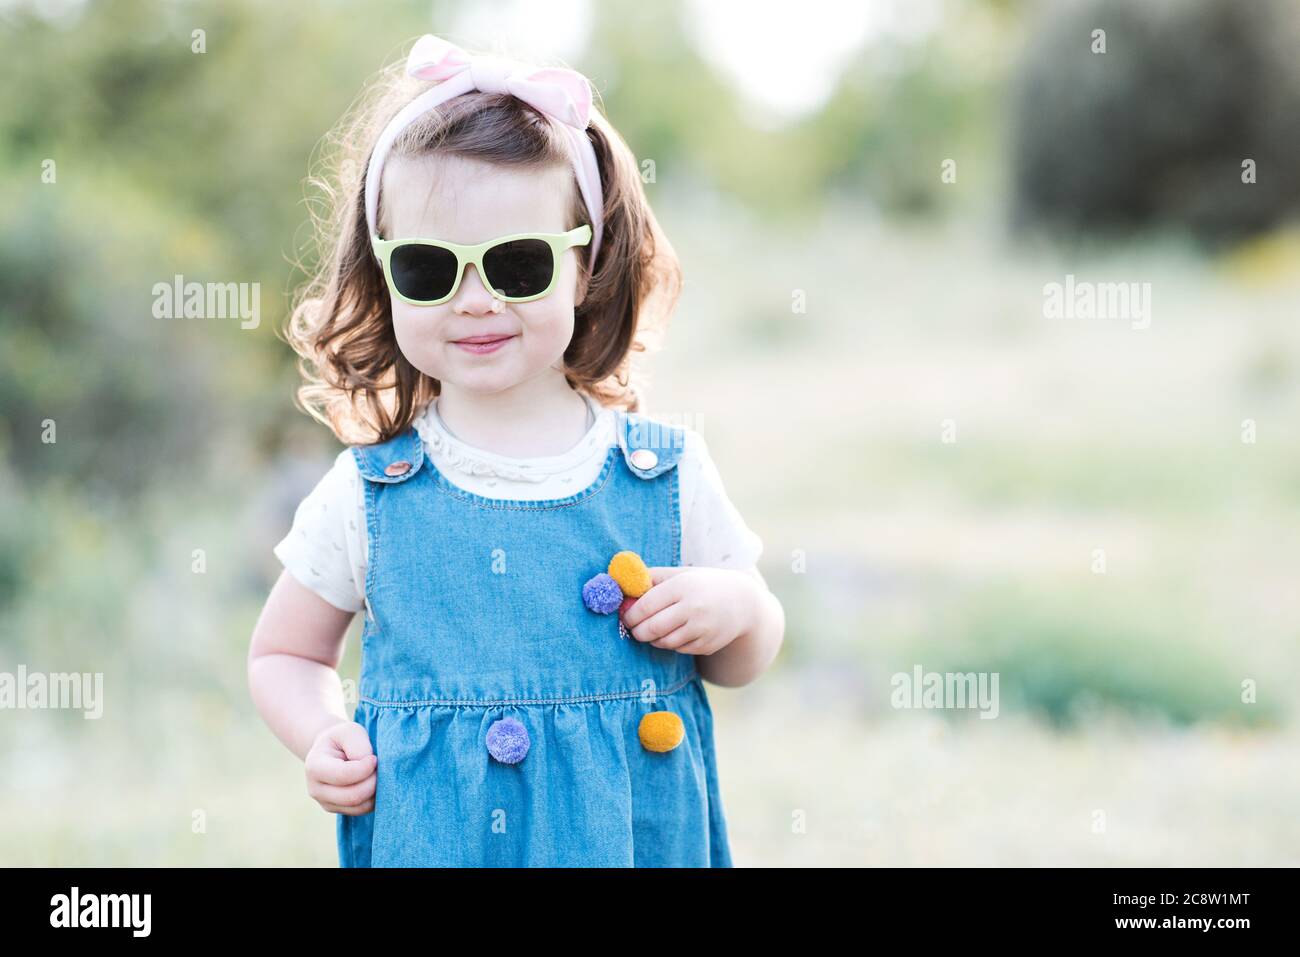 Smiling kid girl 2-3 year old wearing sun glasses and denim dress outdoors over green nature background closeup. Looking at camera. Childhood. Summer Stock Photo